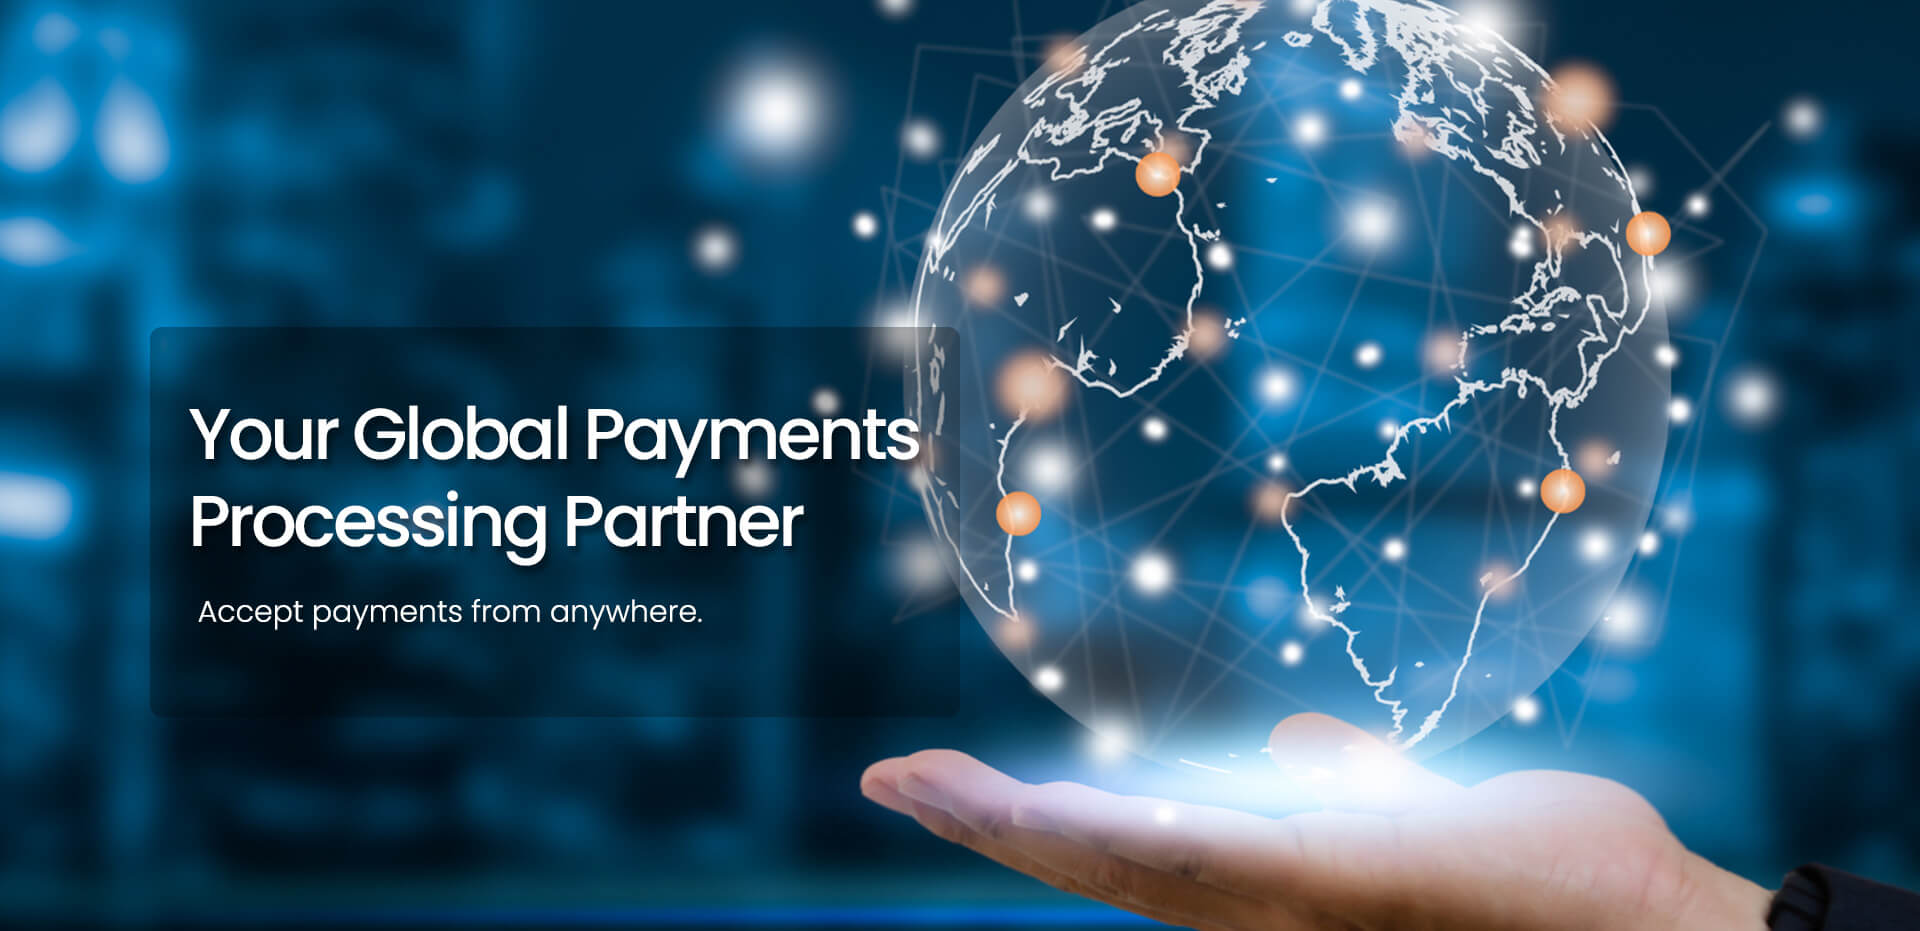 Your Global Payments Processing Partner